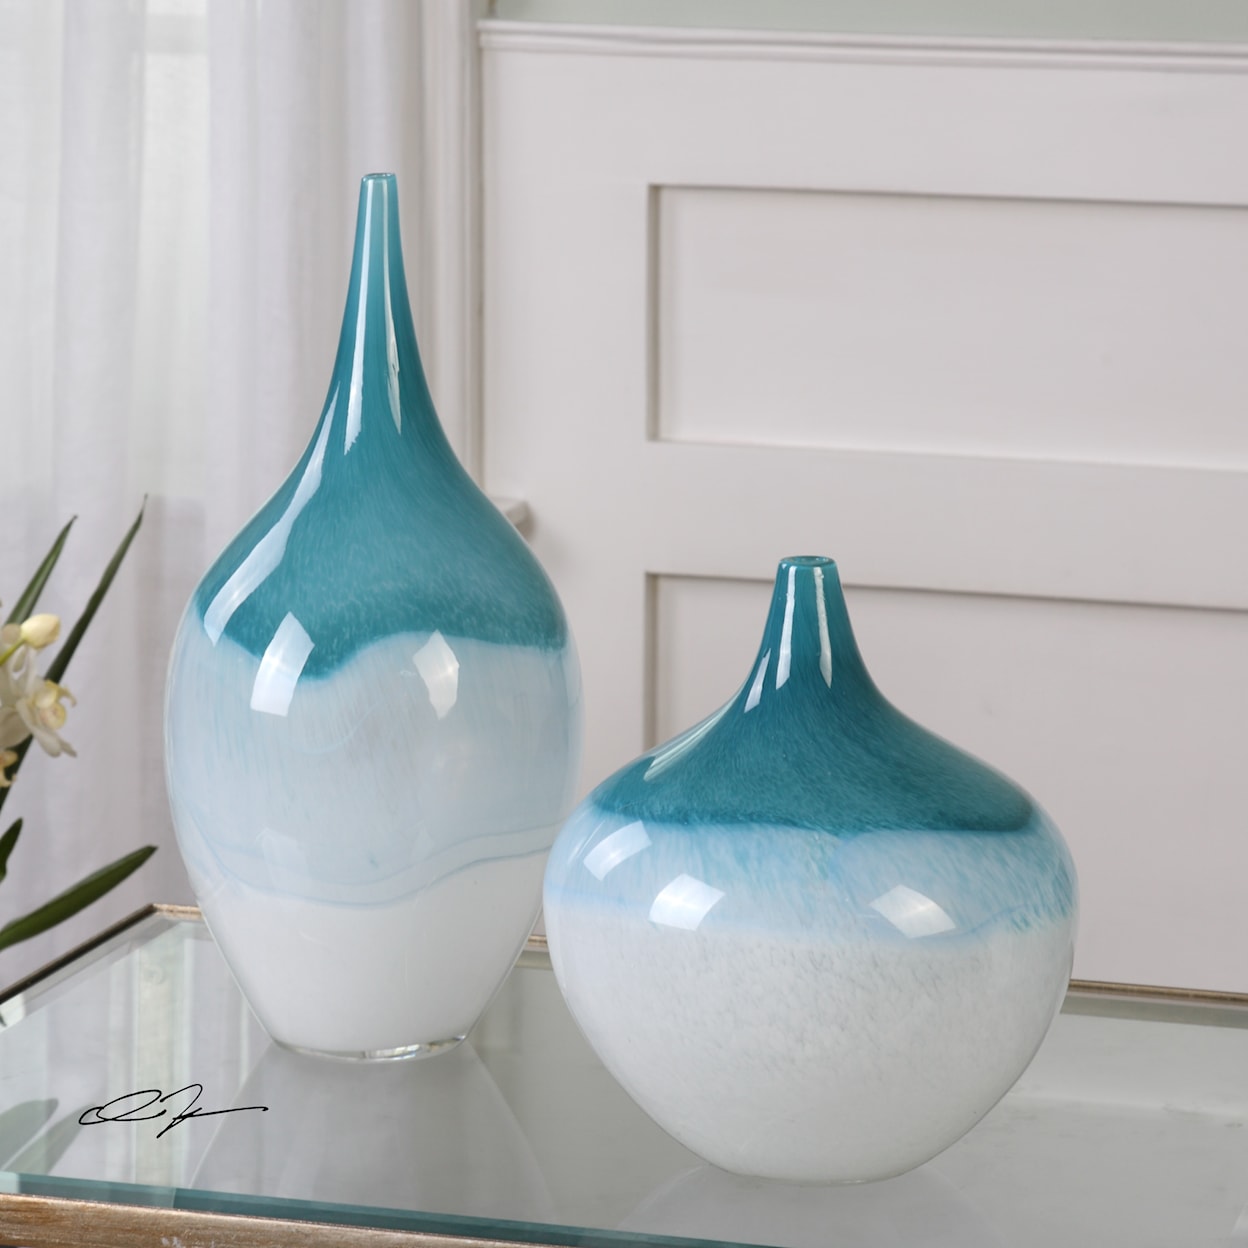 Uttermost Accessories - Vases and Urns Carla Teal White Vases, S/2